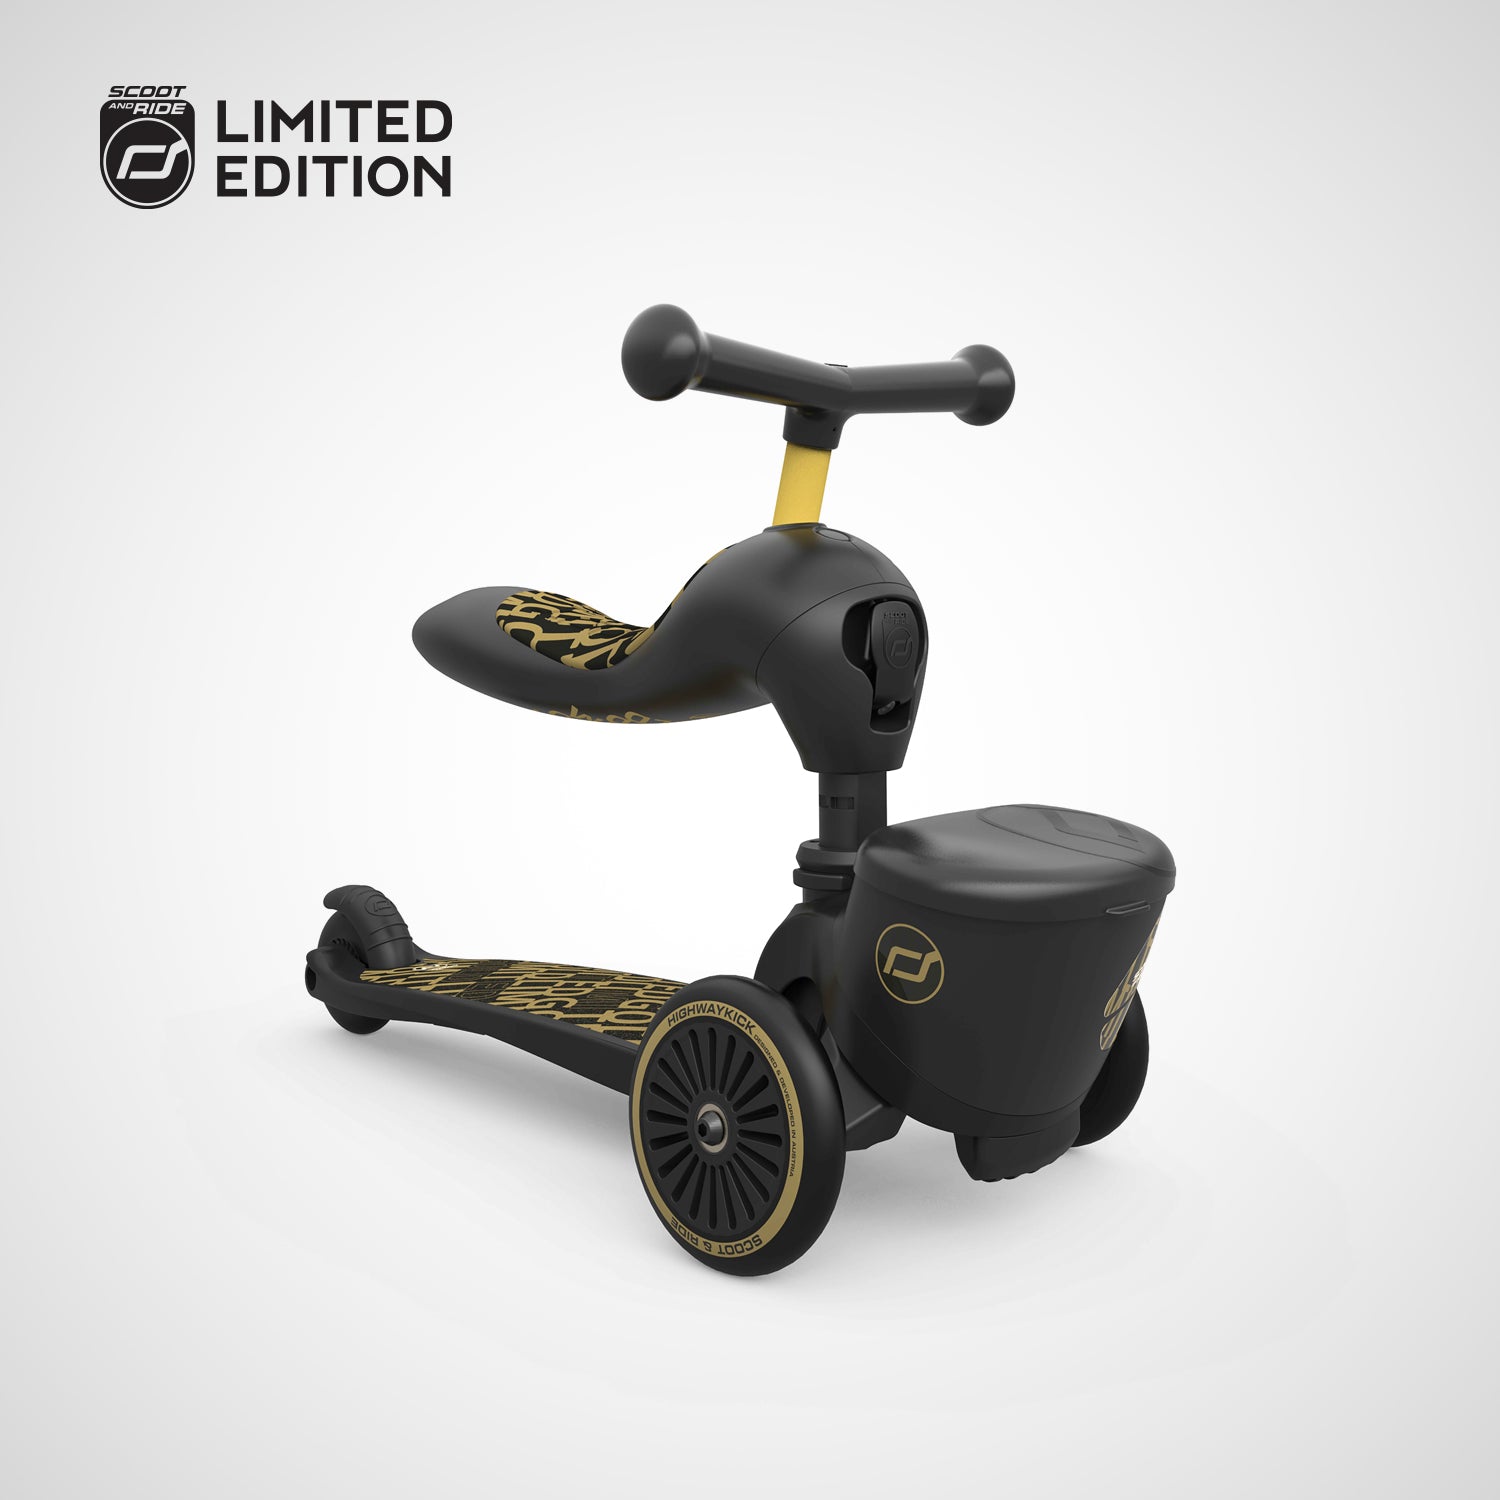 Scoot and Ride Highwaykick 1 Lifestyle Scooter  - Black Limited Edition 210621-96530 | Toysall